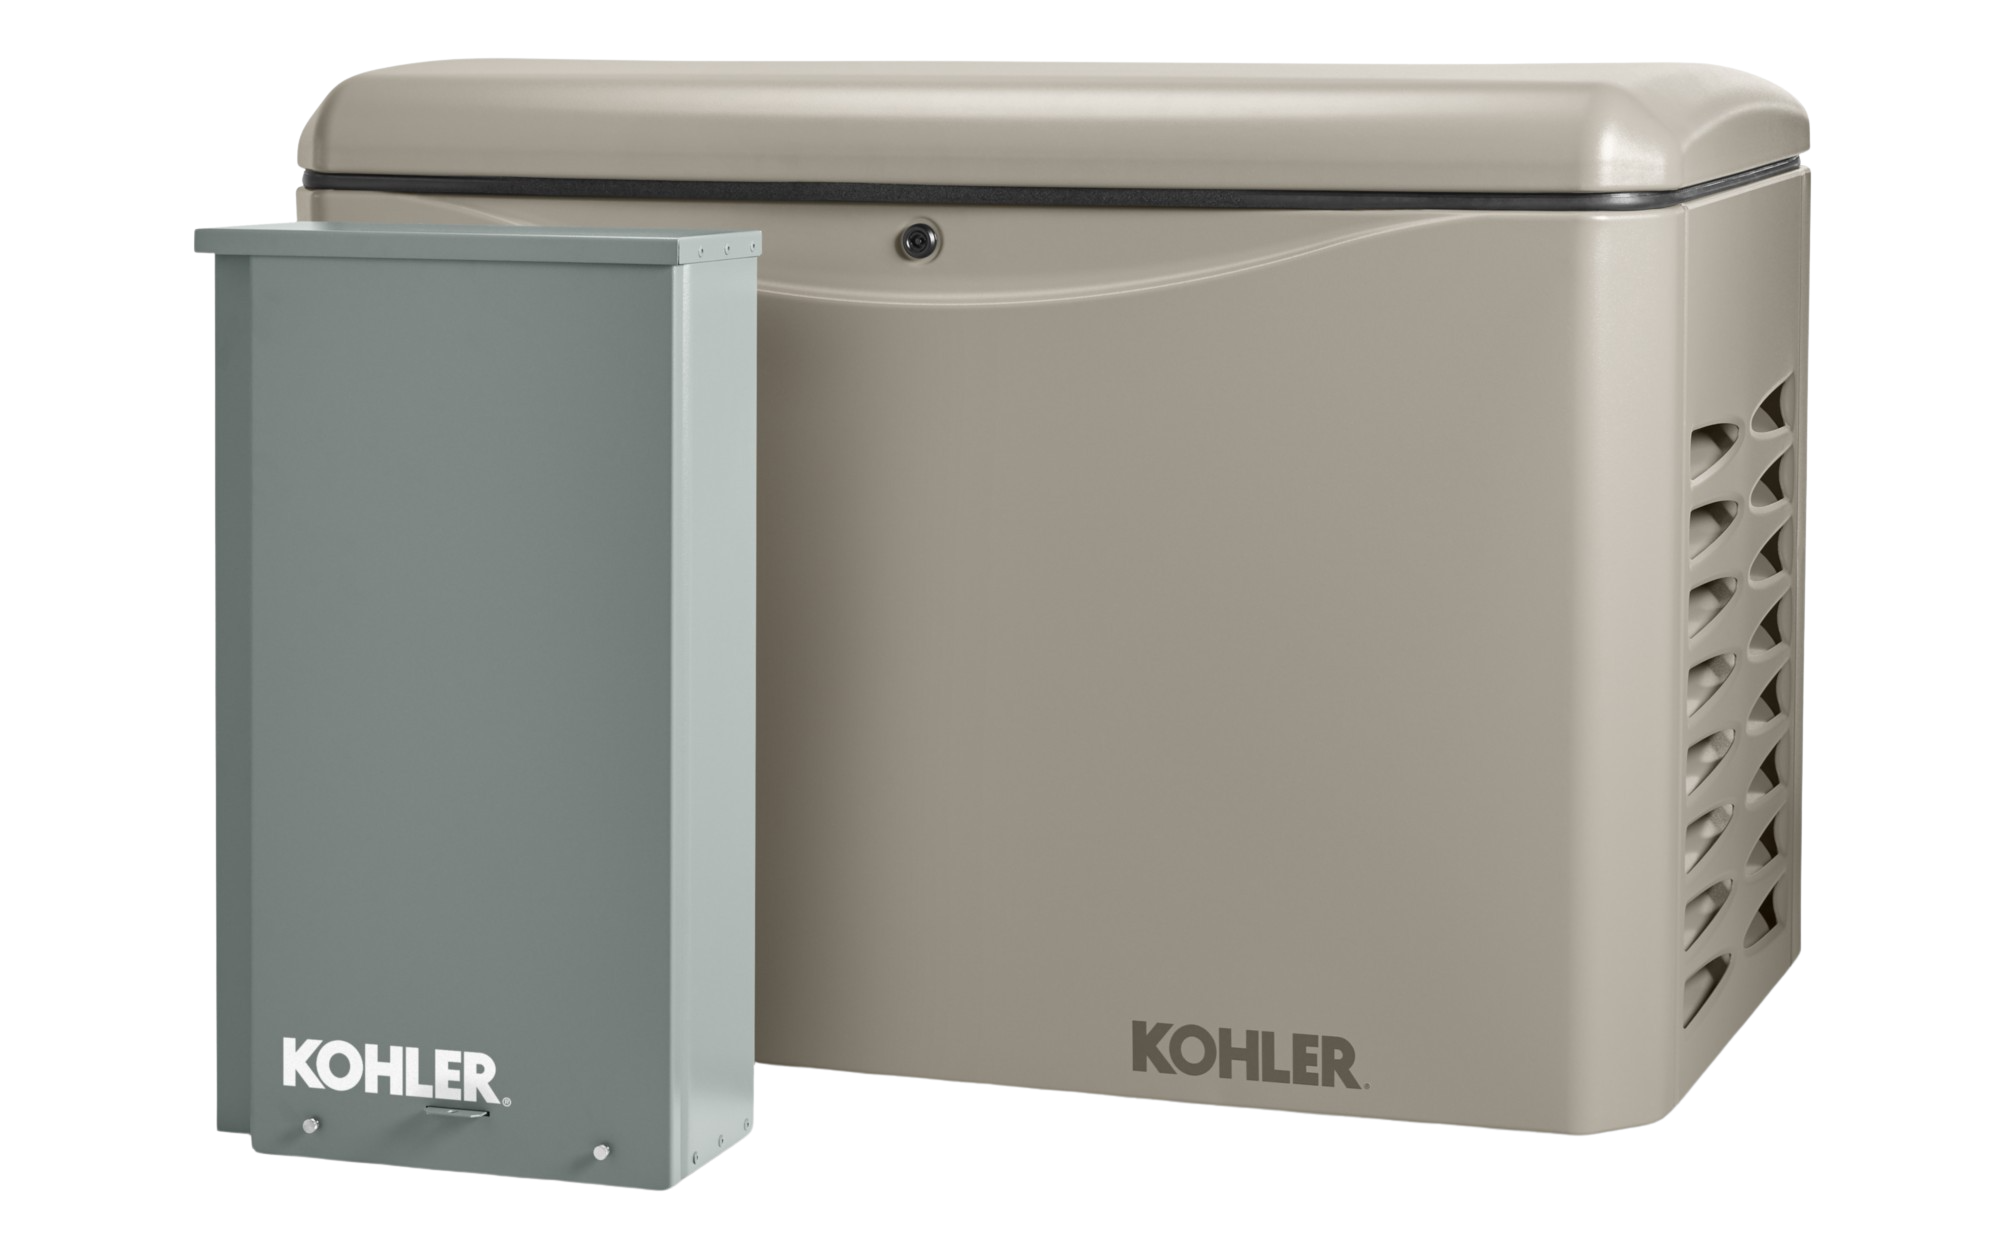 Kohler 20RCAL-200SELS 20KW Standby Generator Air Cooled with 200 Amp Automatic Transfer Switch and OnCue Plus Switch New